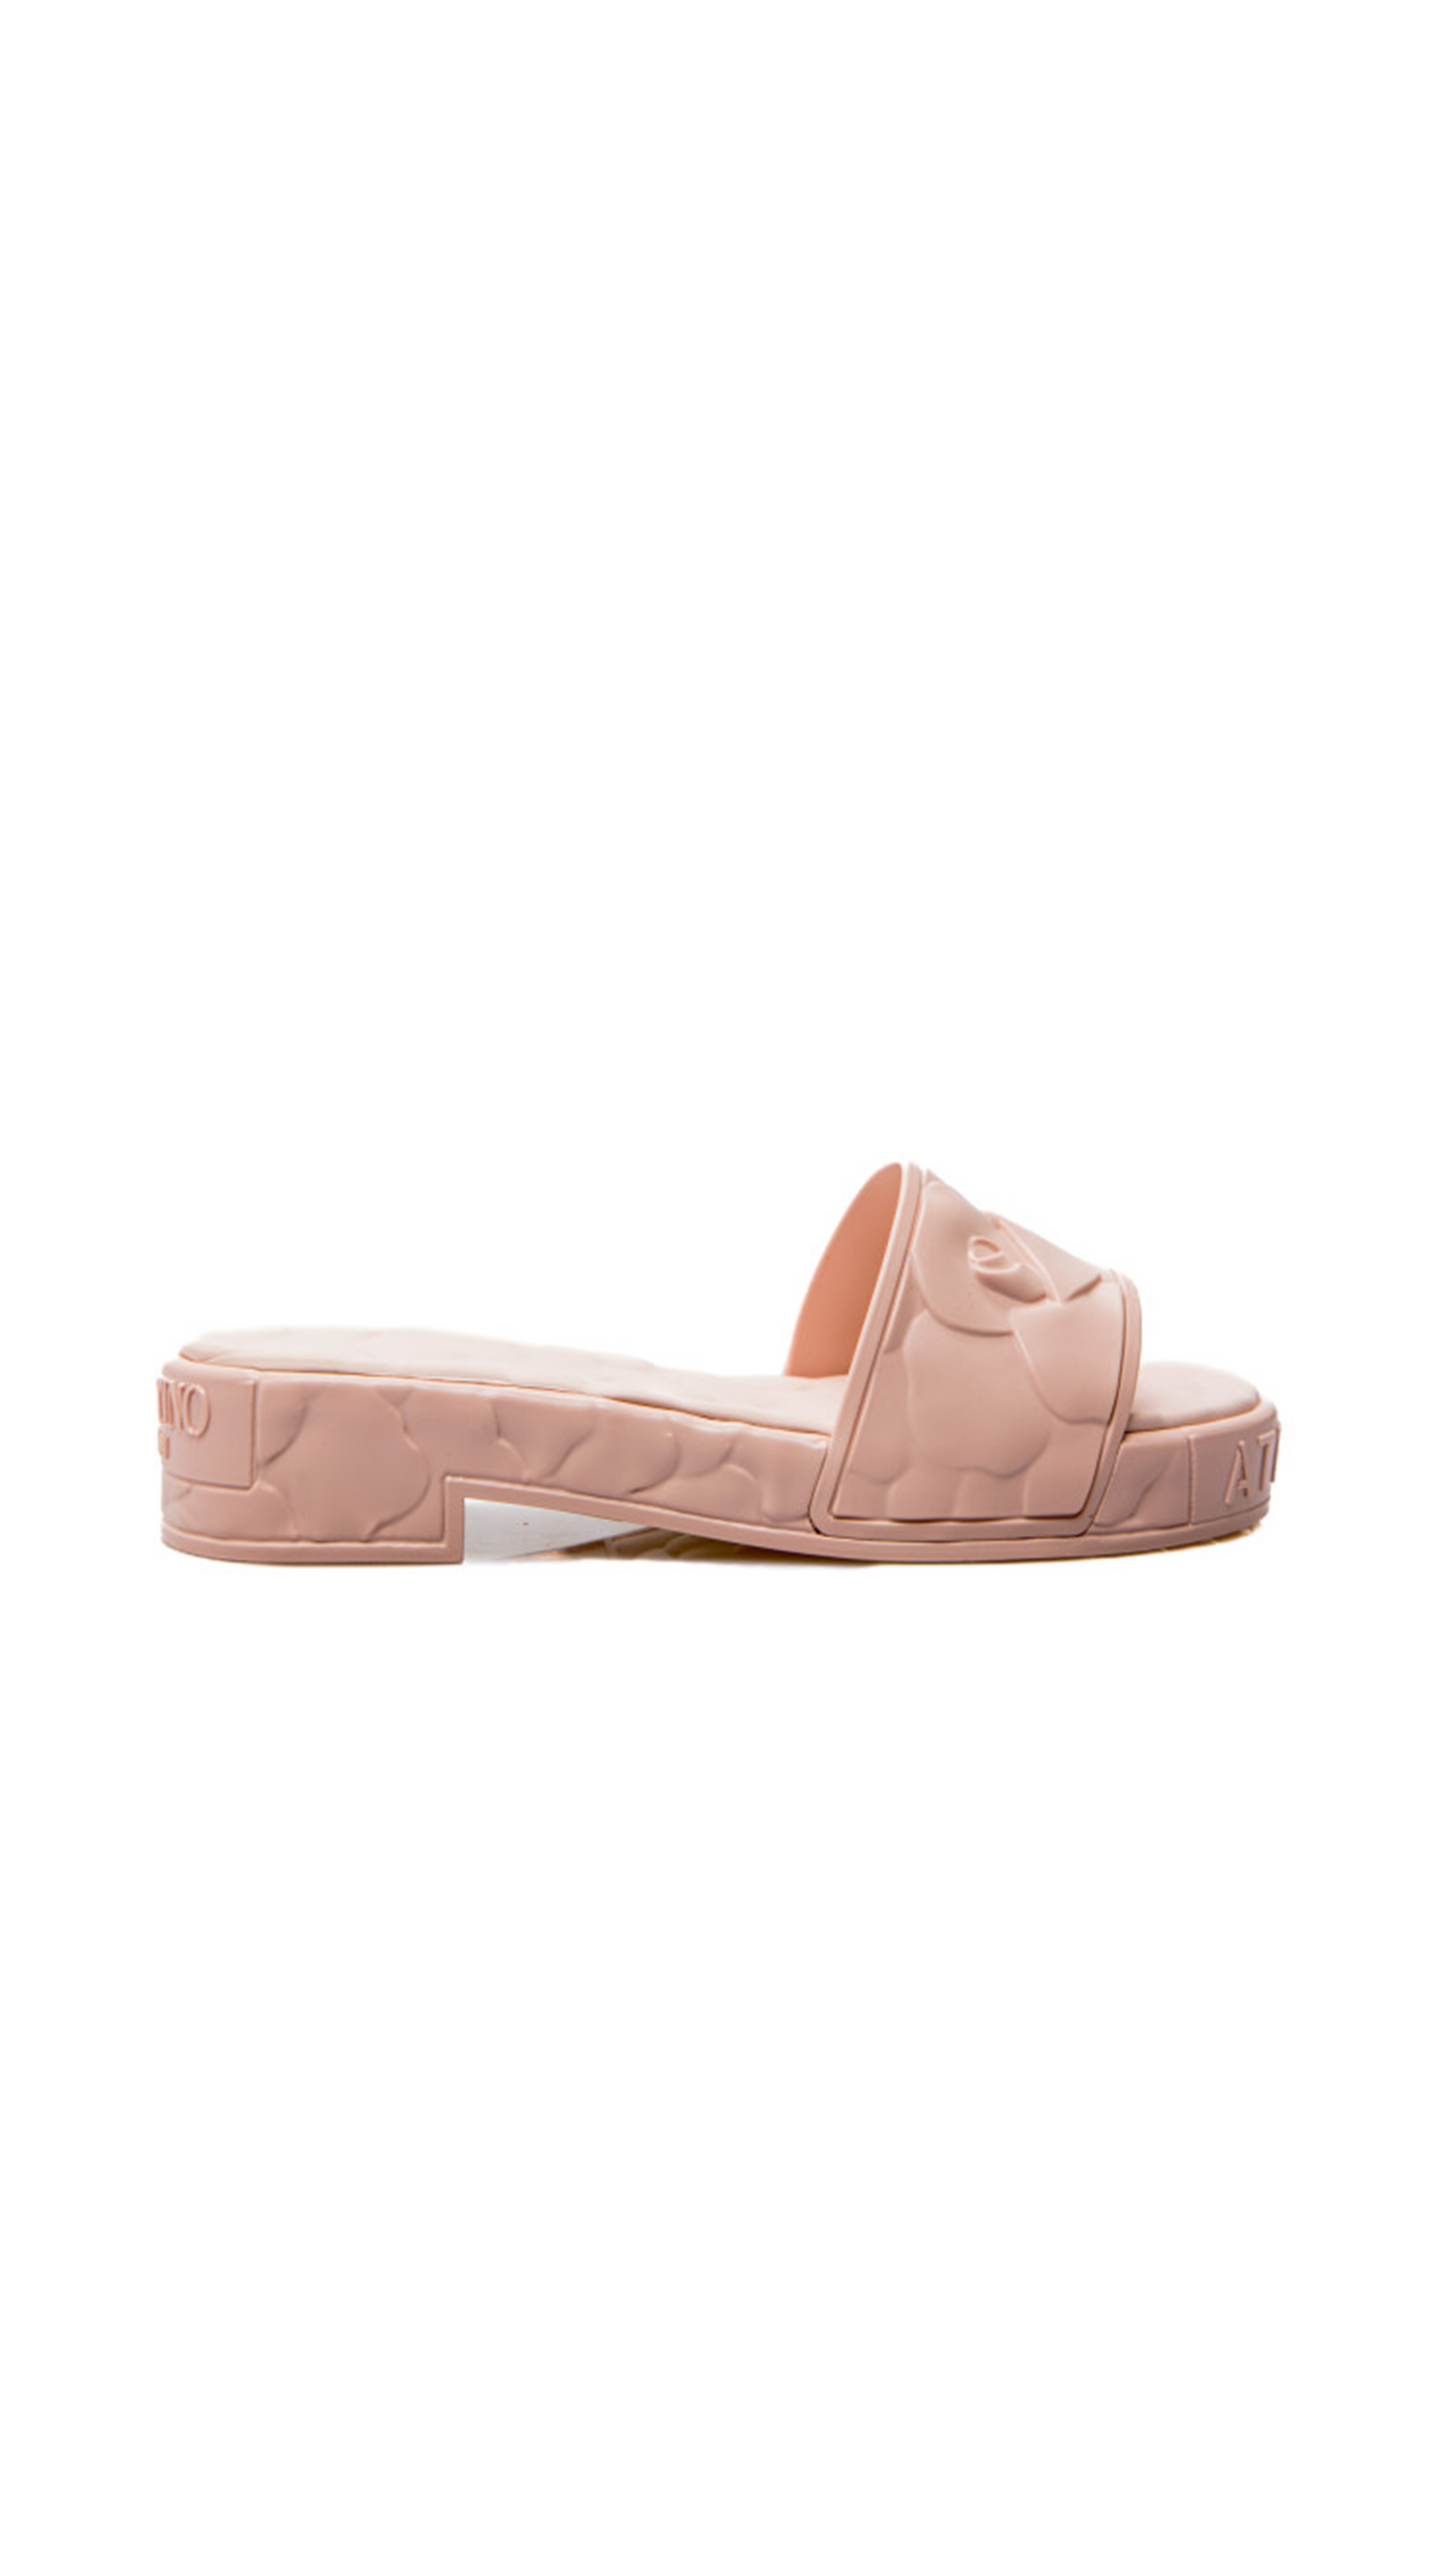 Atelier Rubber Mules - Pink